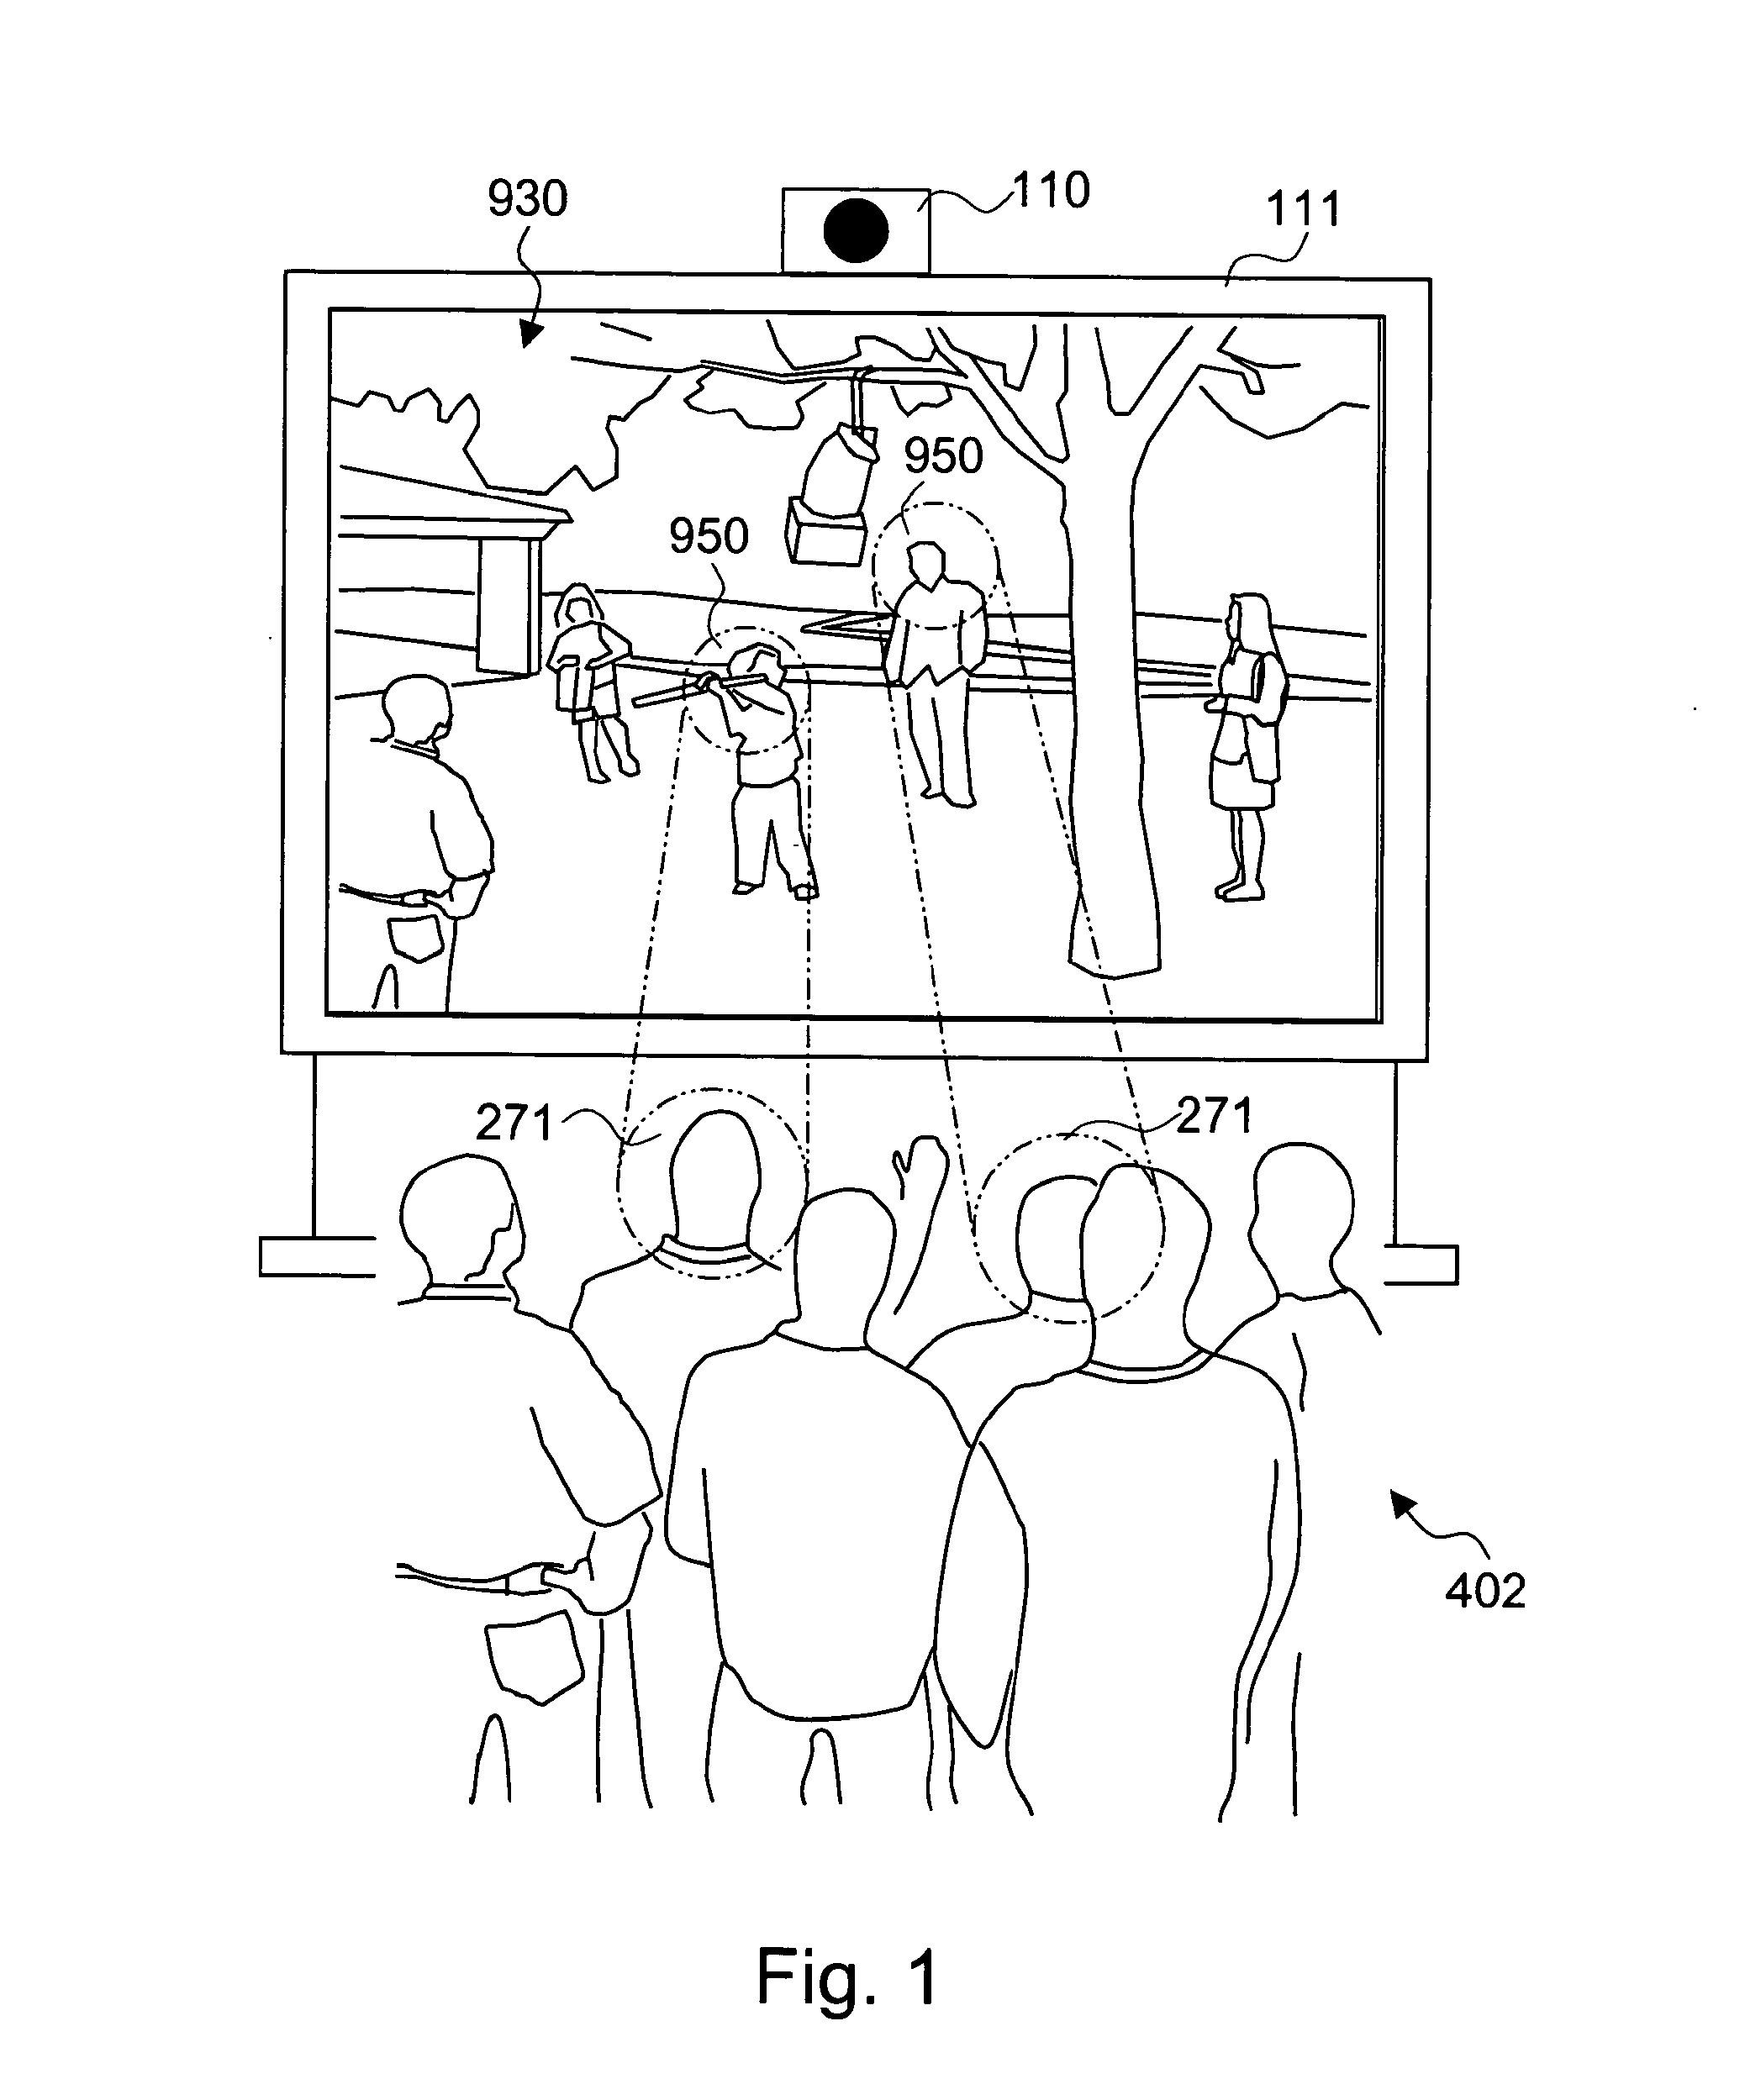 Method and System for Immersing Face Images into a Video Sequence